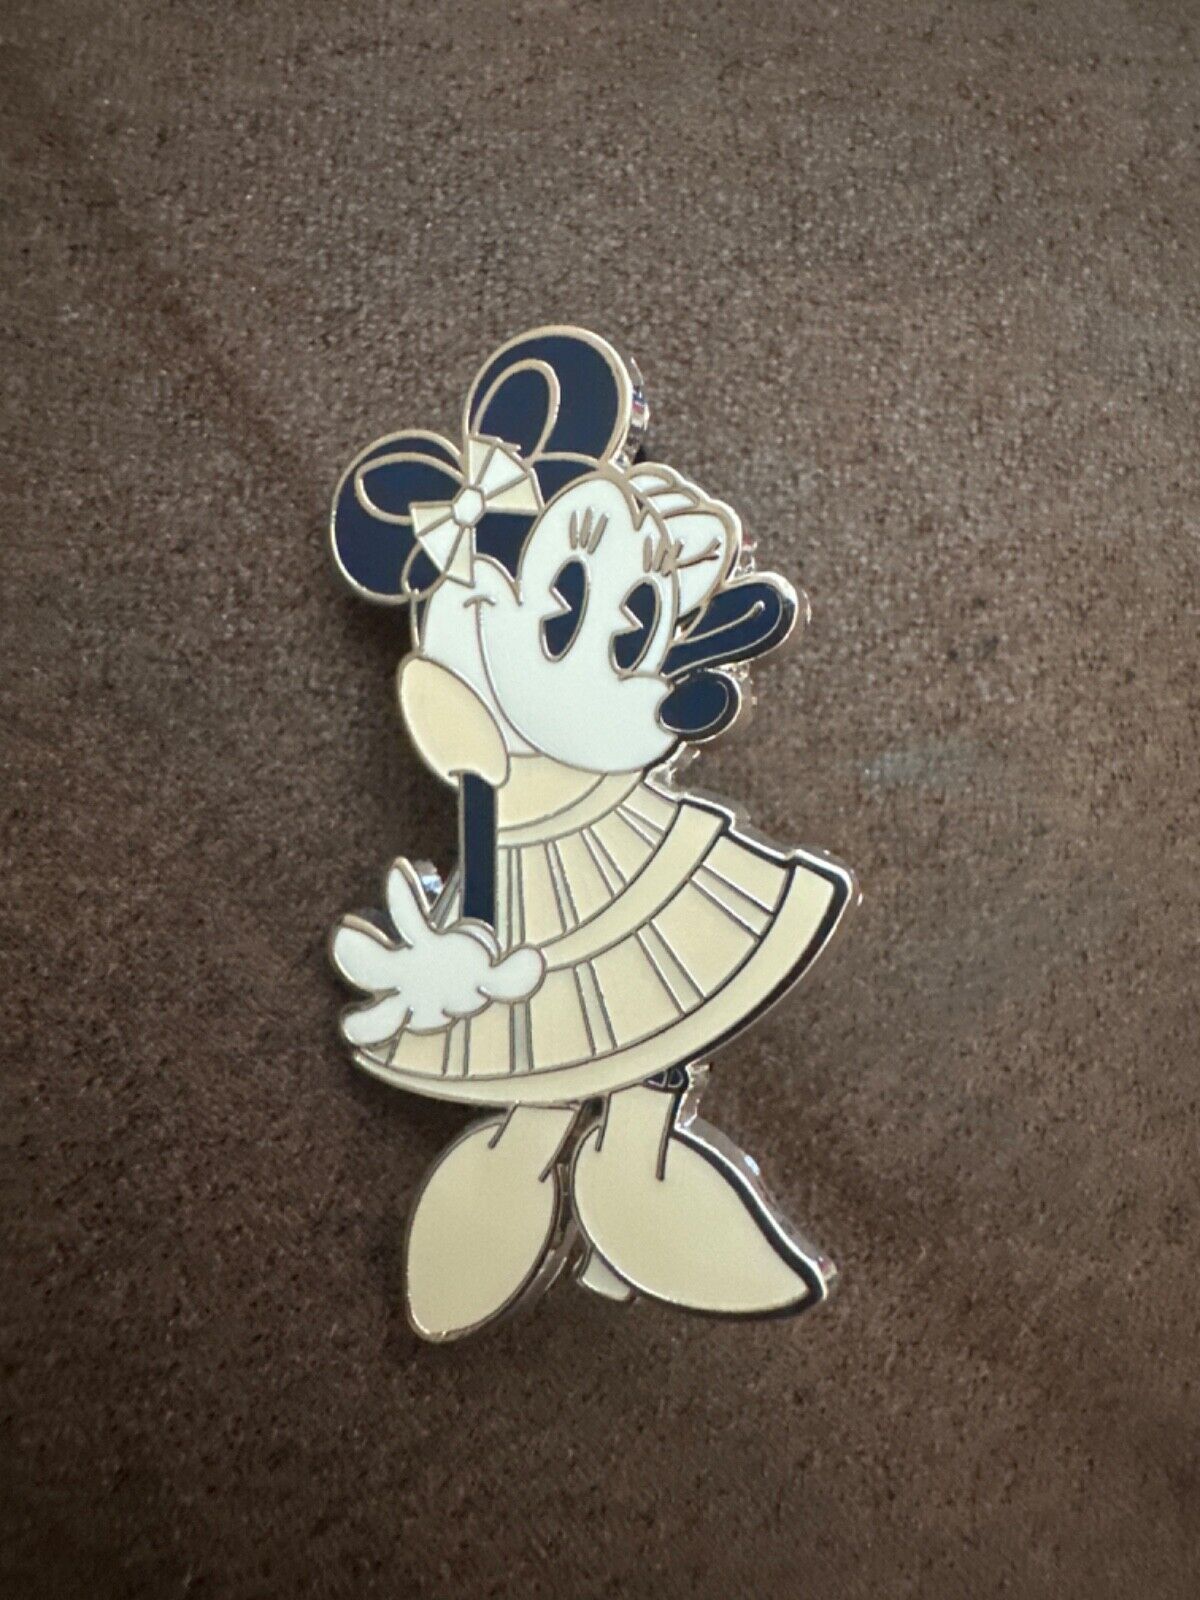 Minnie Mouse The Main Attraction Space Mountain Disney LR Pin